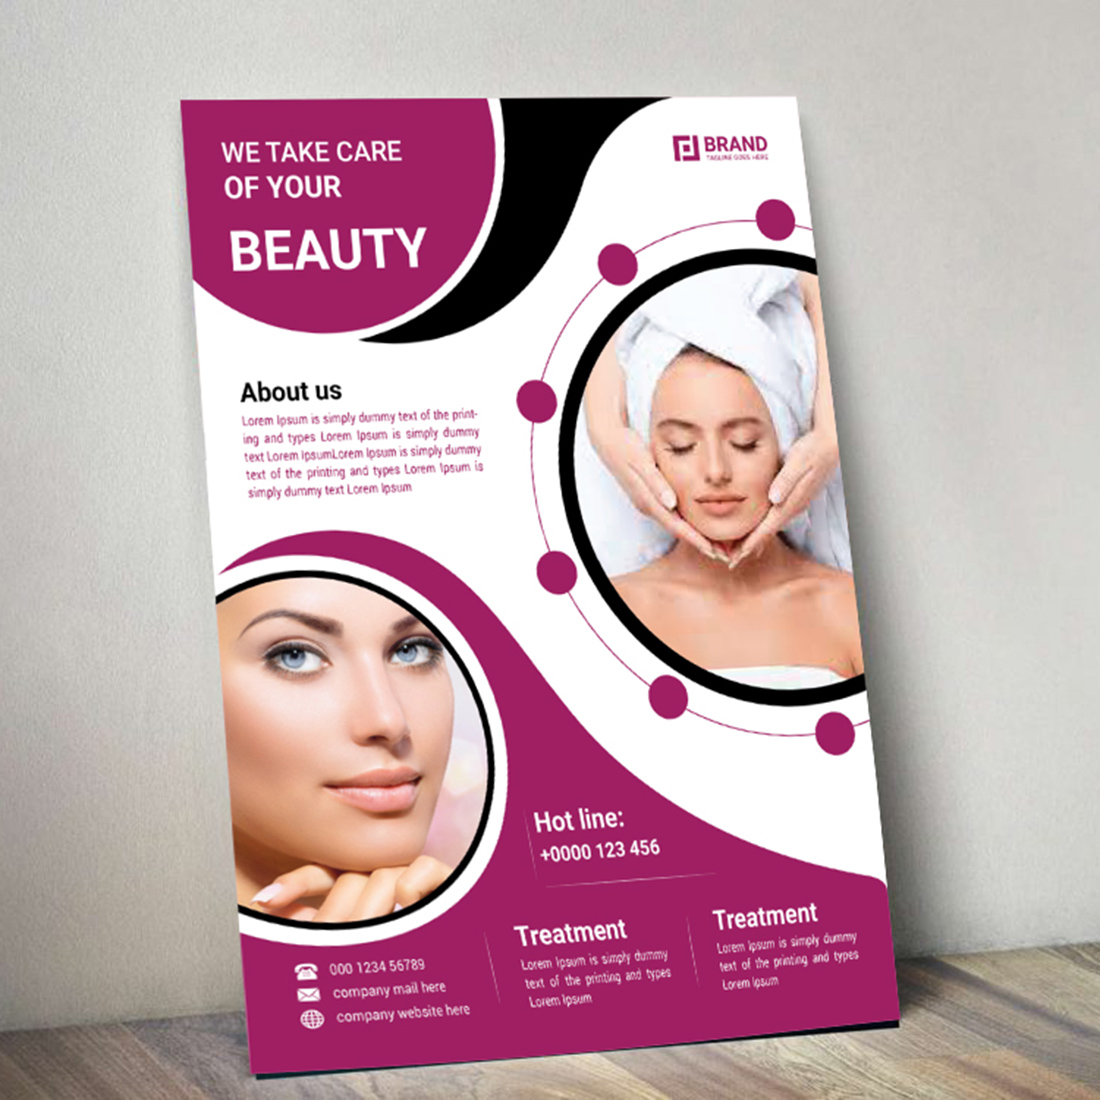 Beauty flyer design with modern cover image.